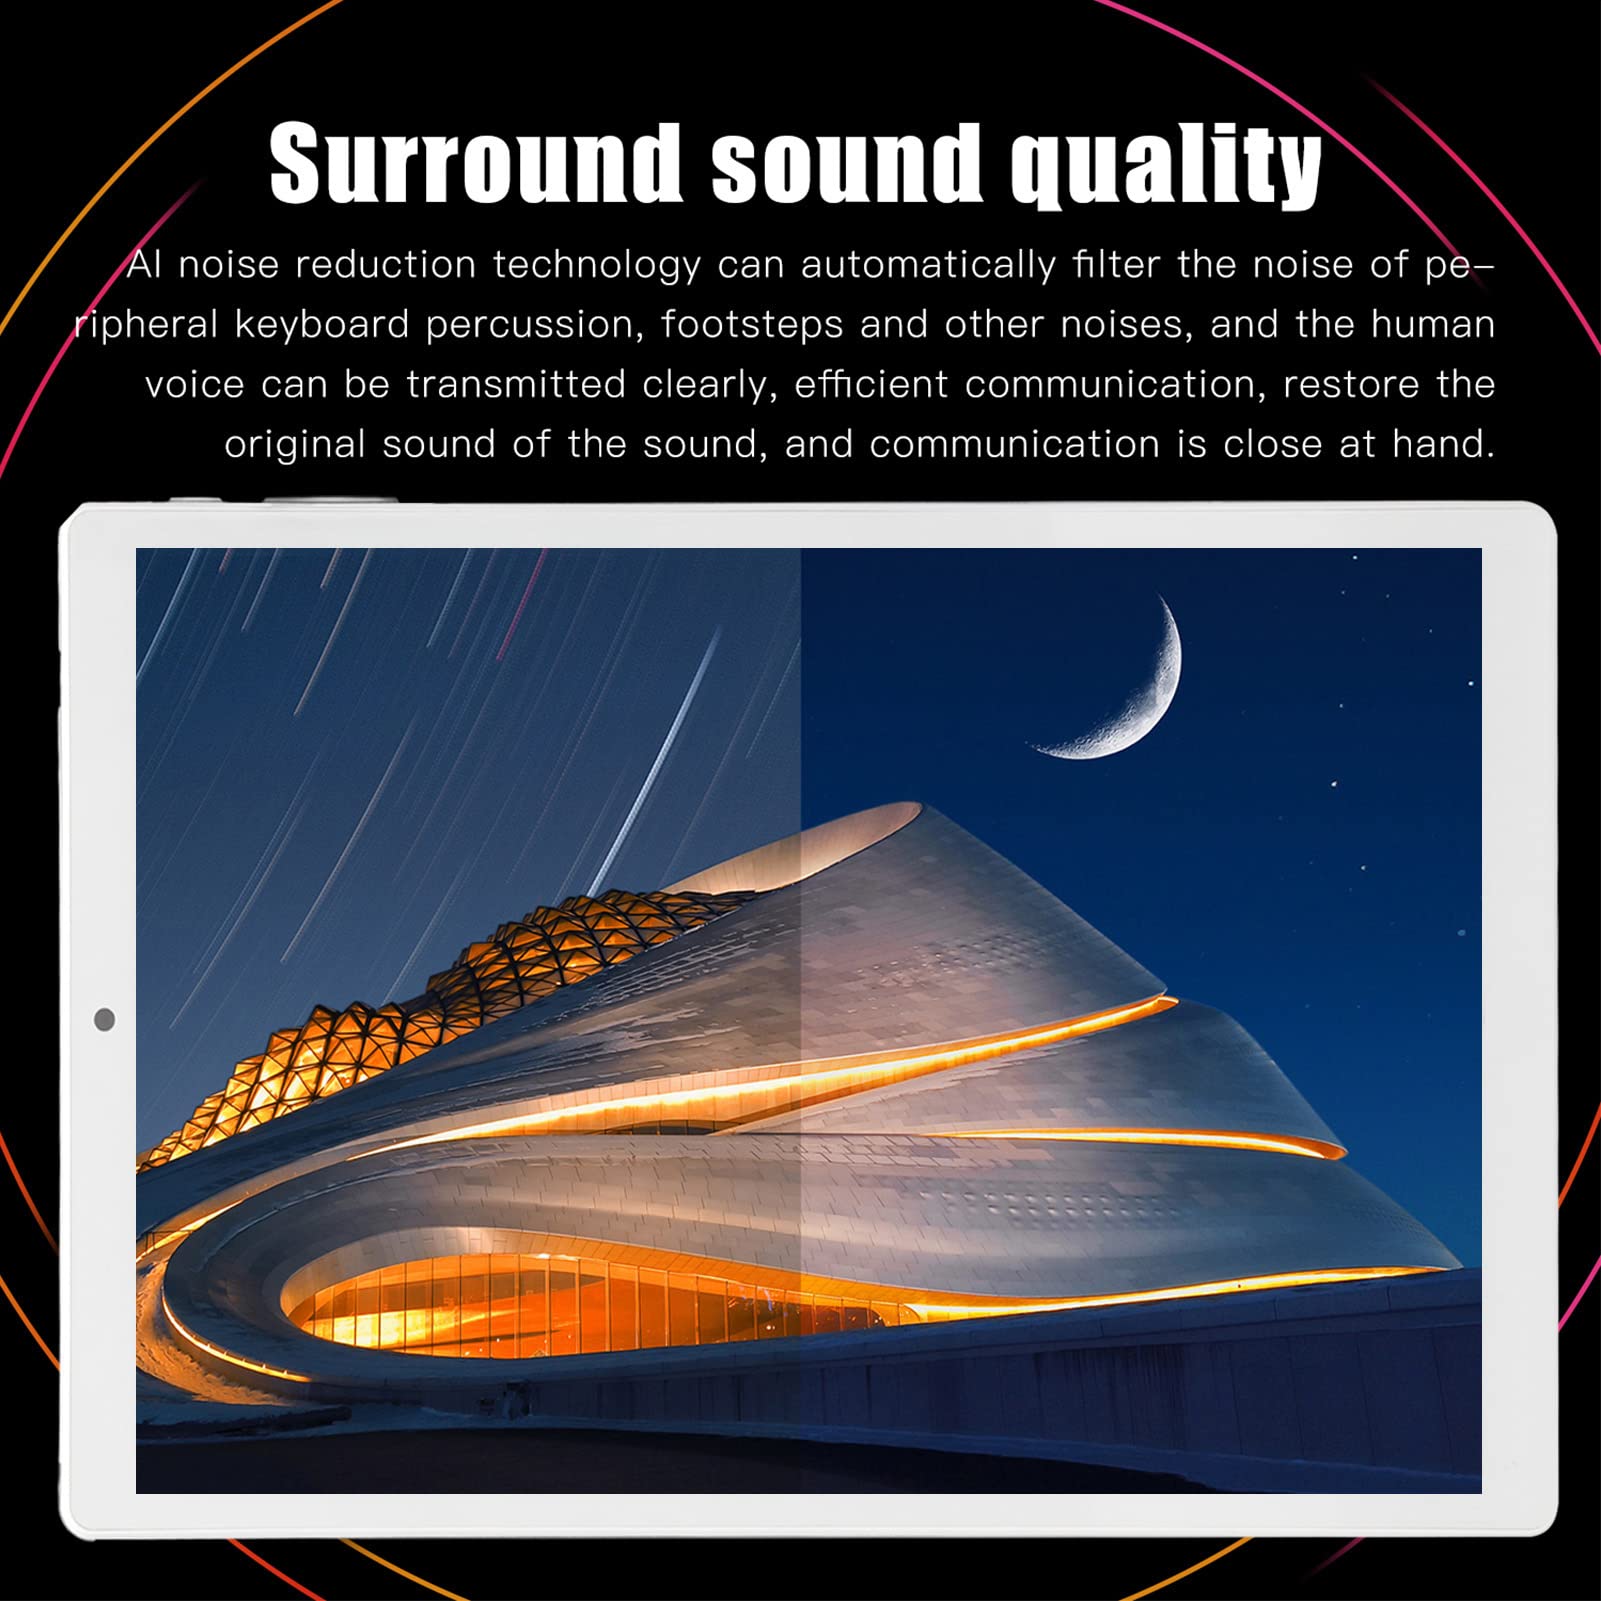 Septpenta 10.1 Inch Tablet, Deca Core CPU Processor, Dual Anti Blue Light, Type C Port Rechargeable, Dual Sim Dual Standby, Multi Language Support, for Watching Movies, Videos and Playing Games(USA)